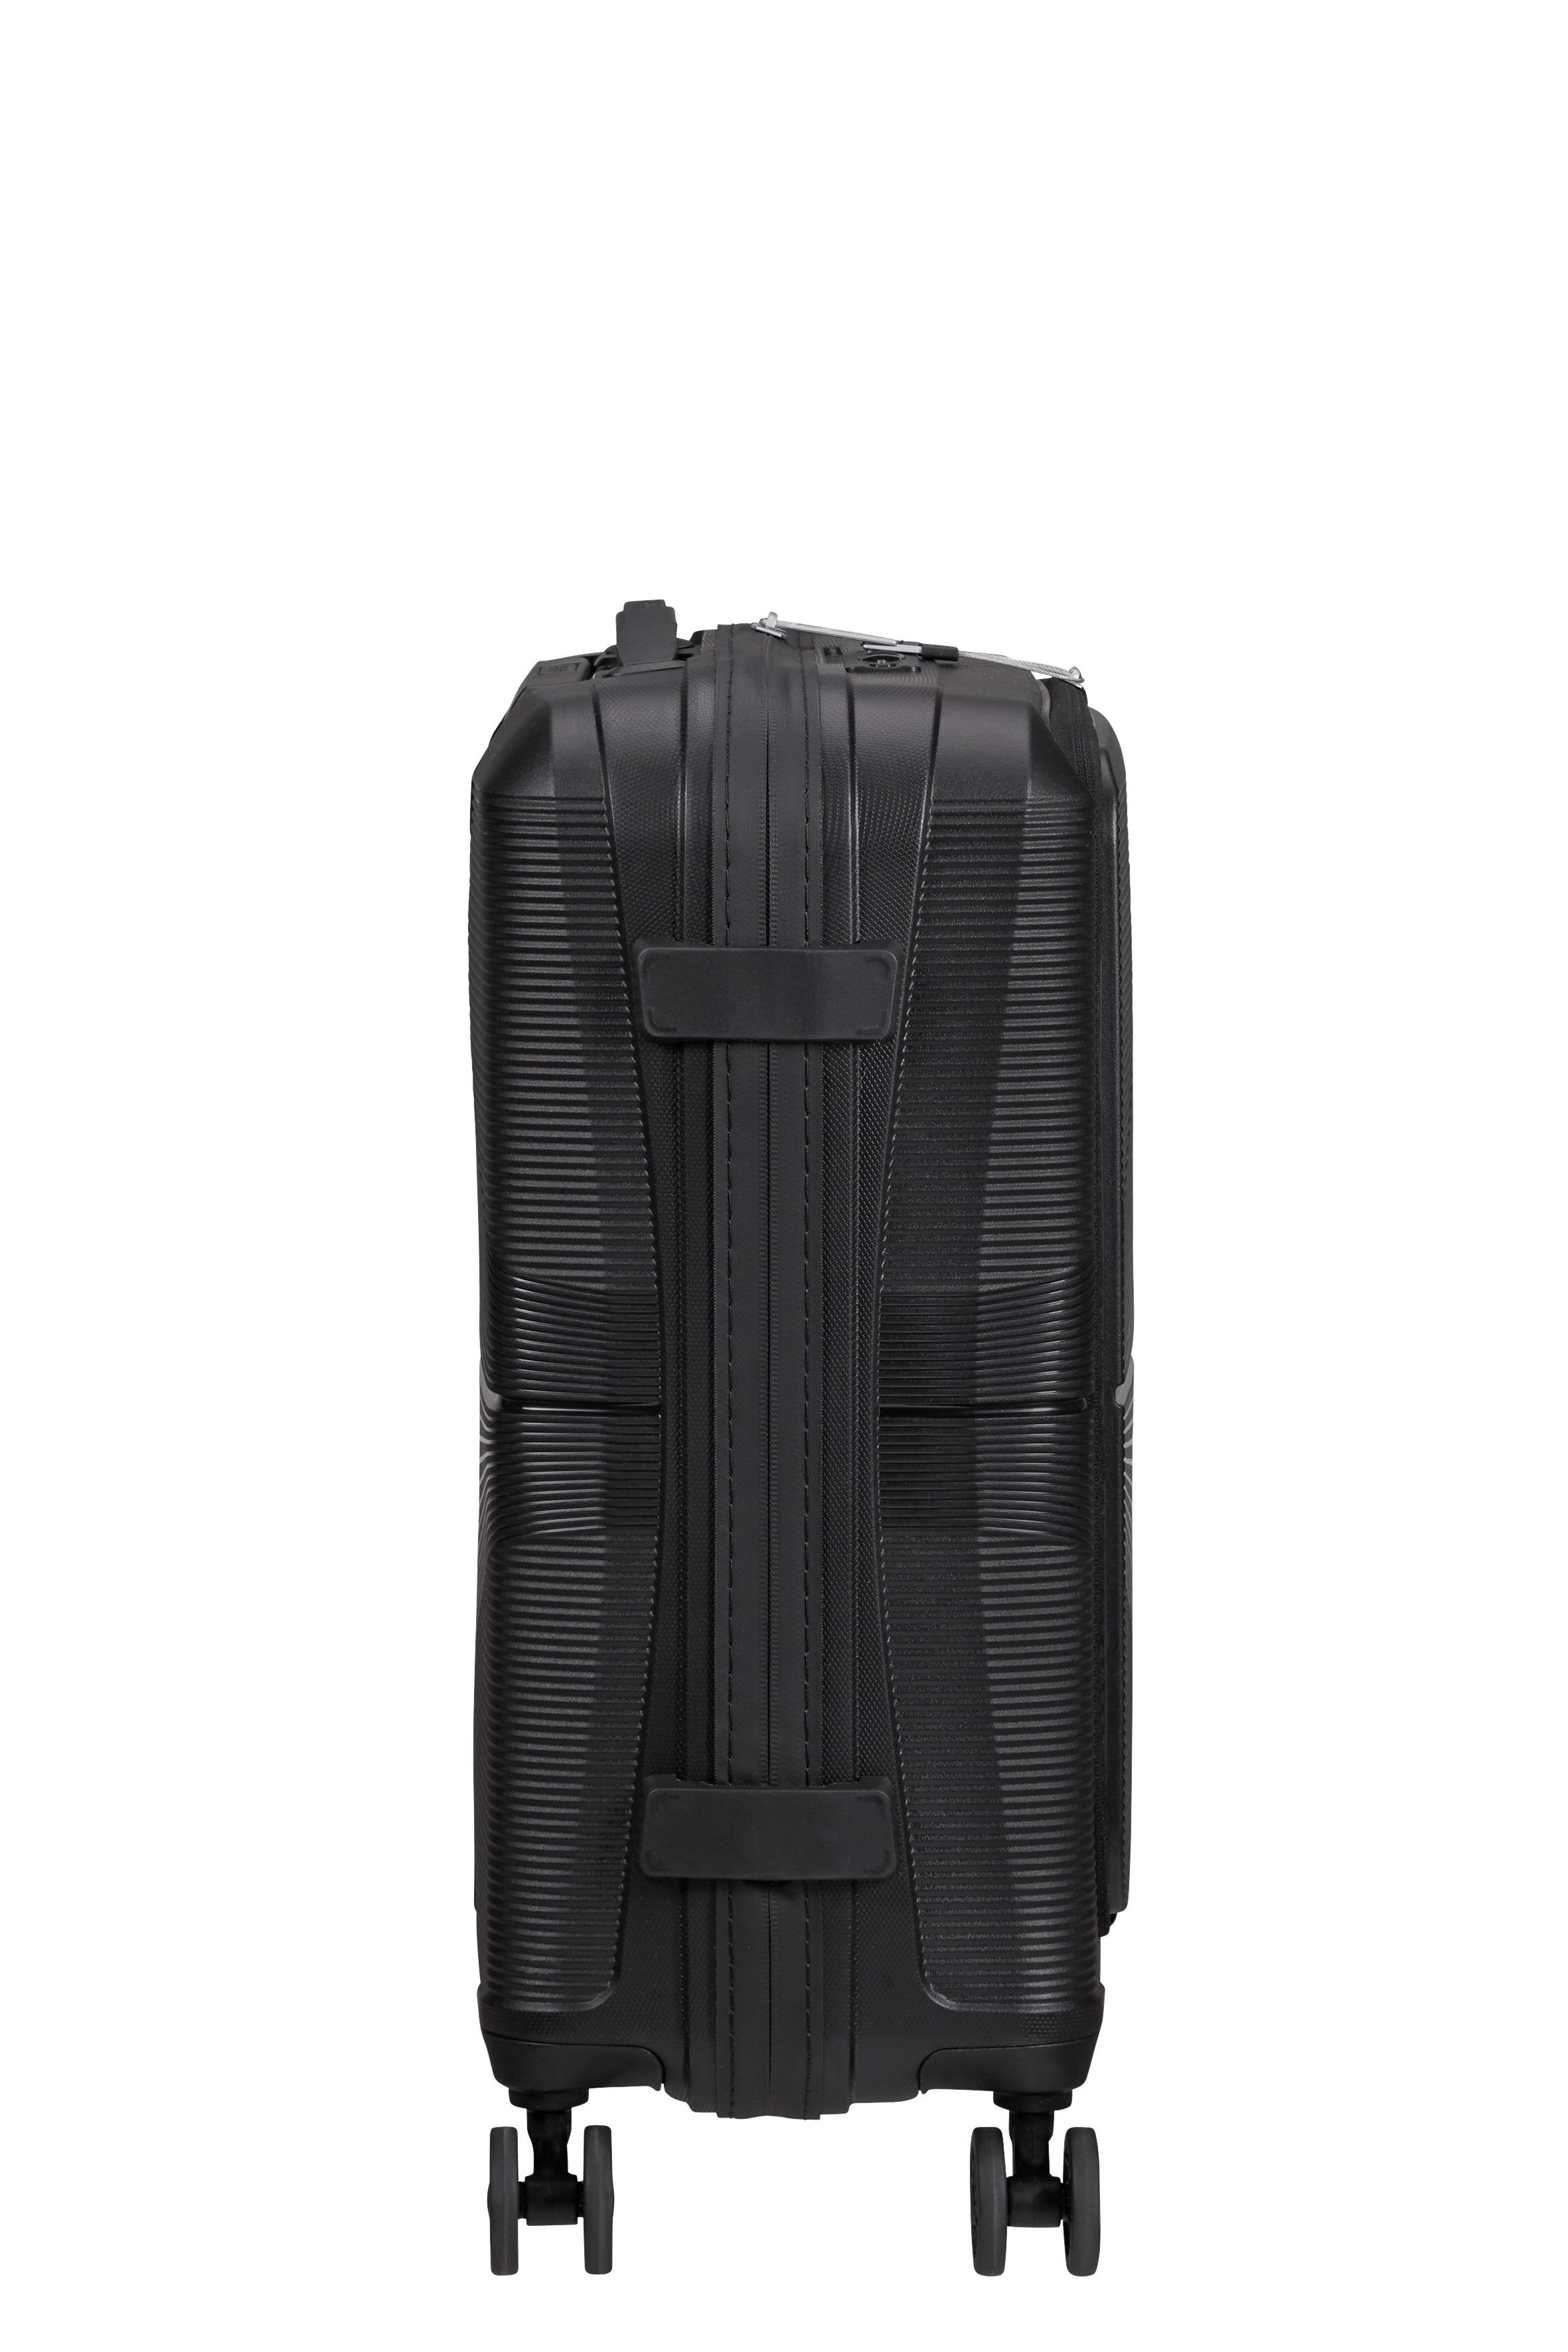 American Tourister Spinner Airconic Cabin 55cm